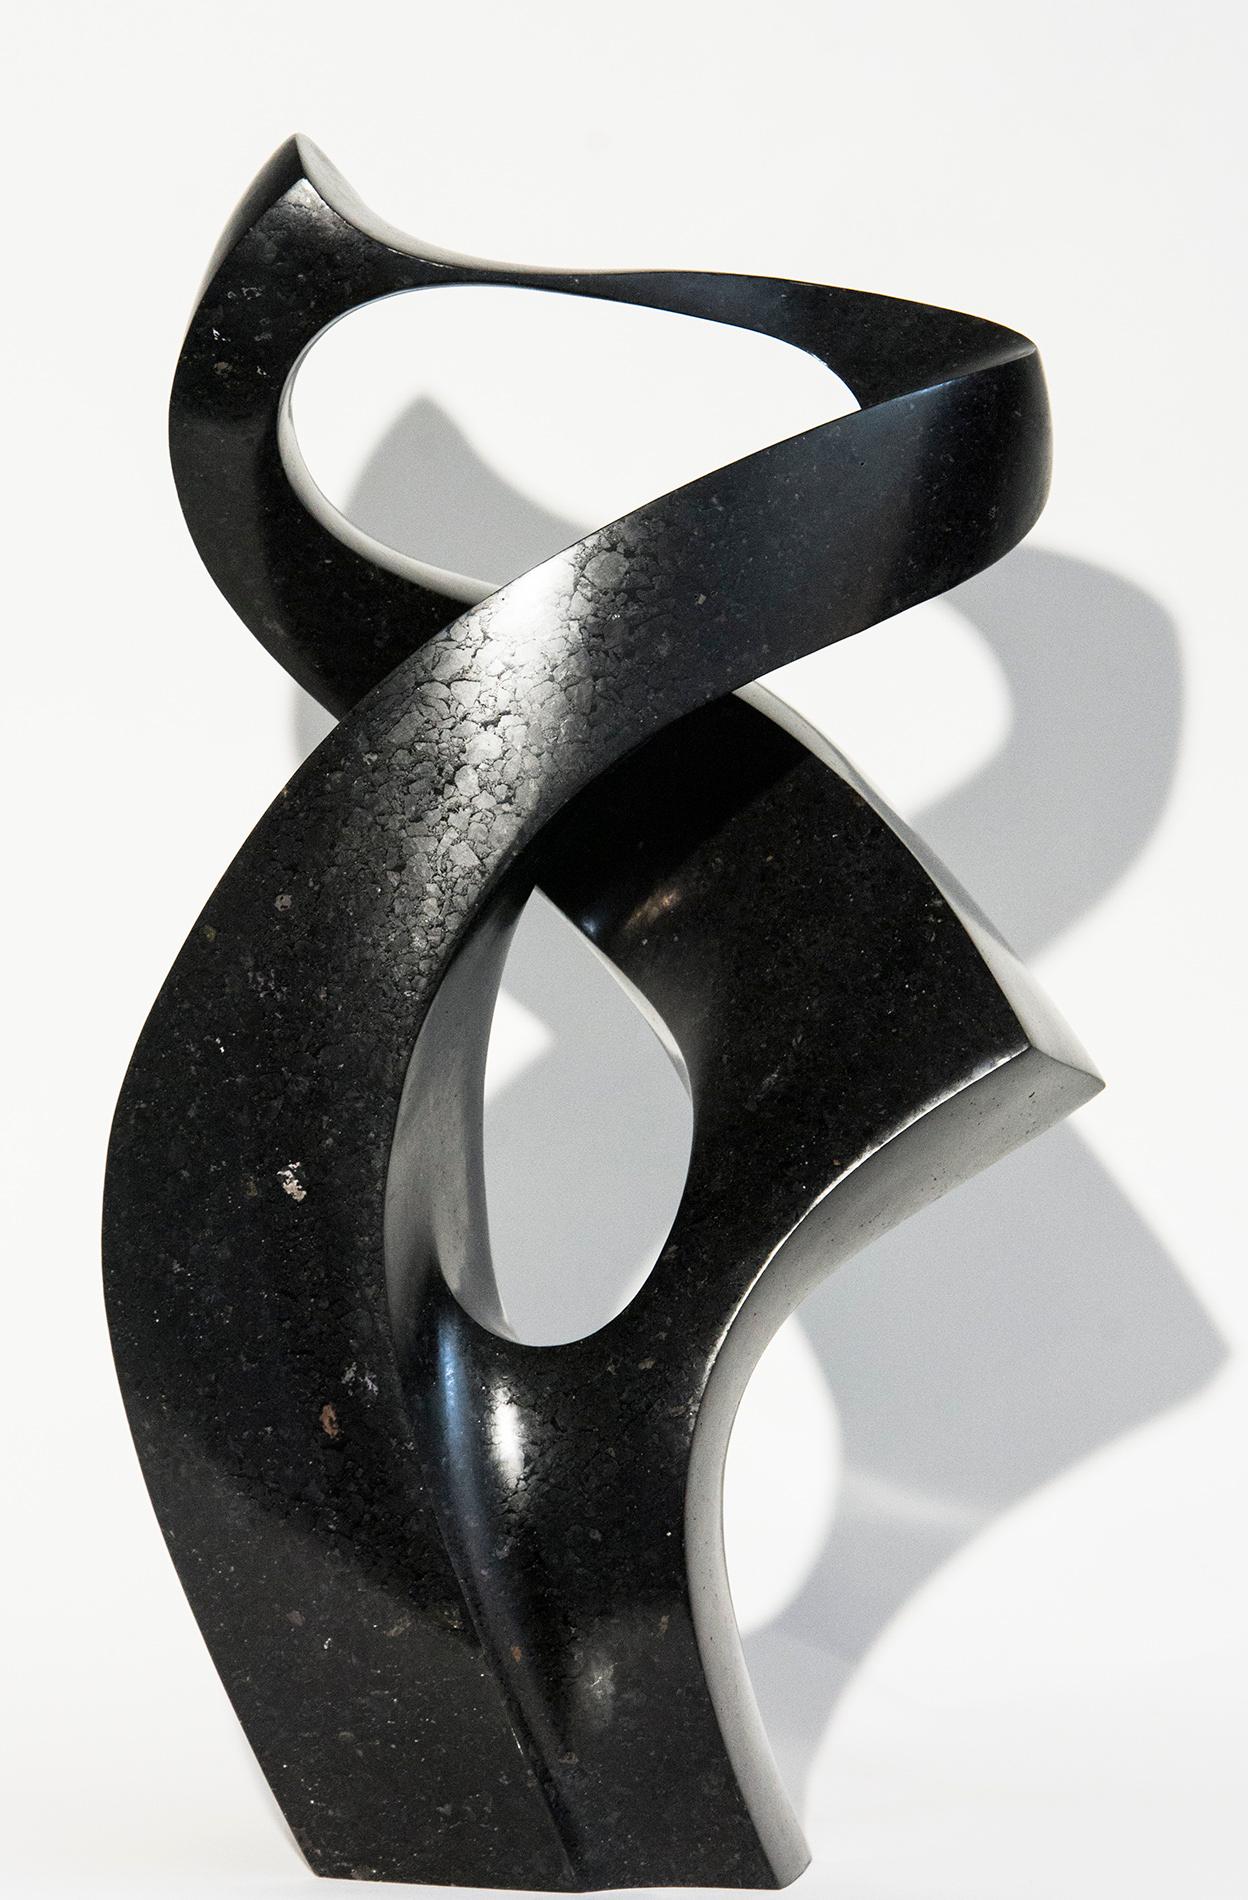 Embrace 2/50 - dark, smooth, polished, abstract, black granite sculpture - Sculpture by Jeremy Guy